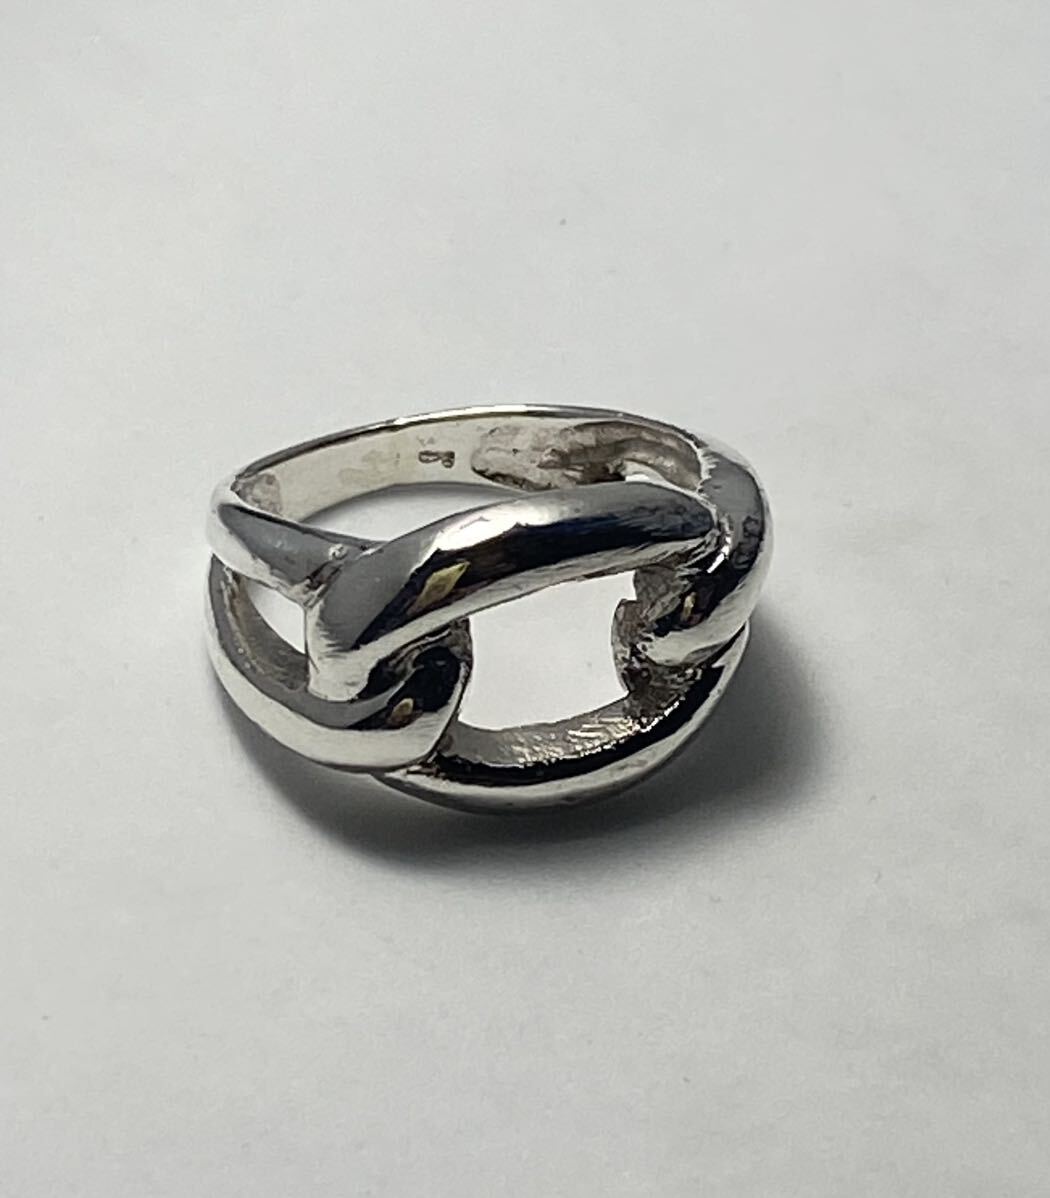 LMJ1C-o.G21 knot silver 925 ring .. screw . unisex gift stylish silver 215